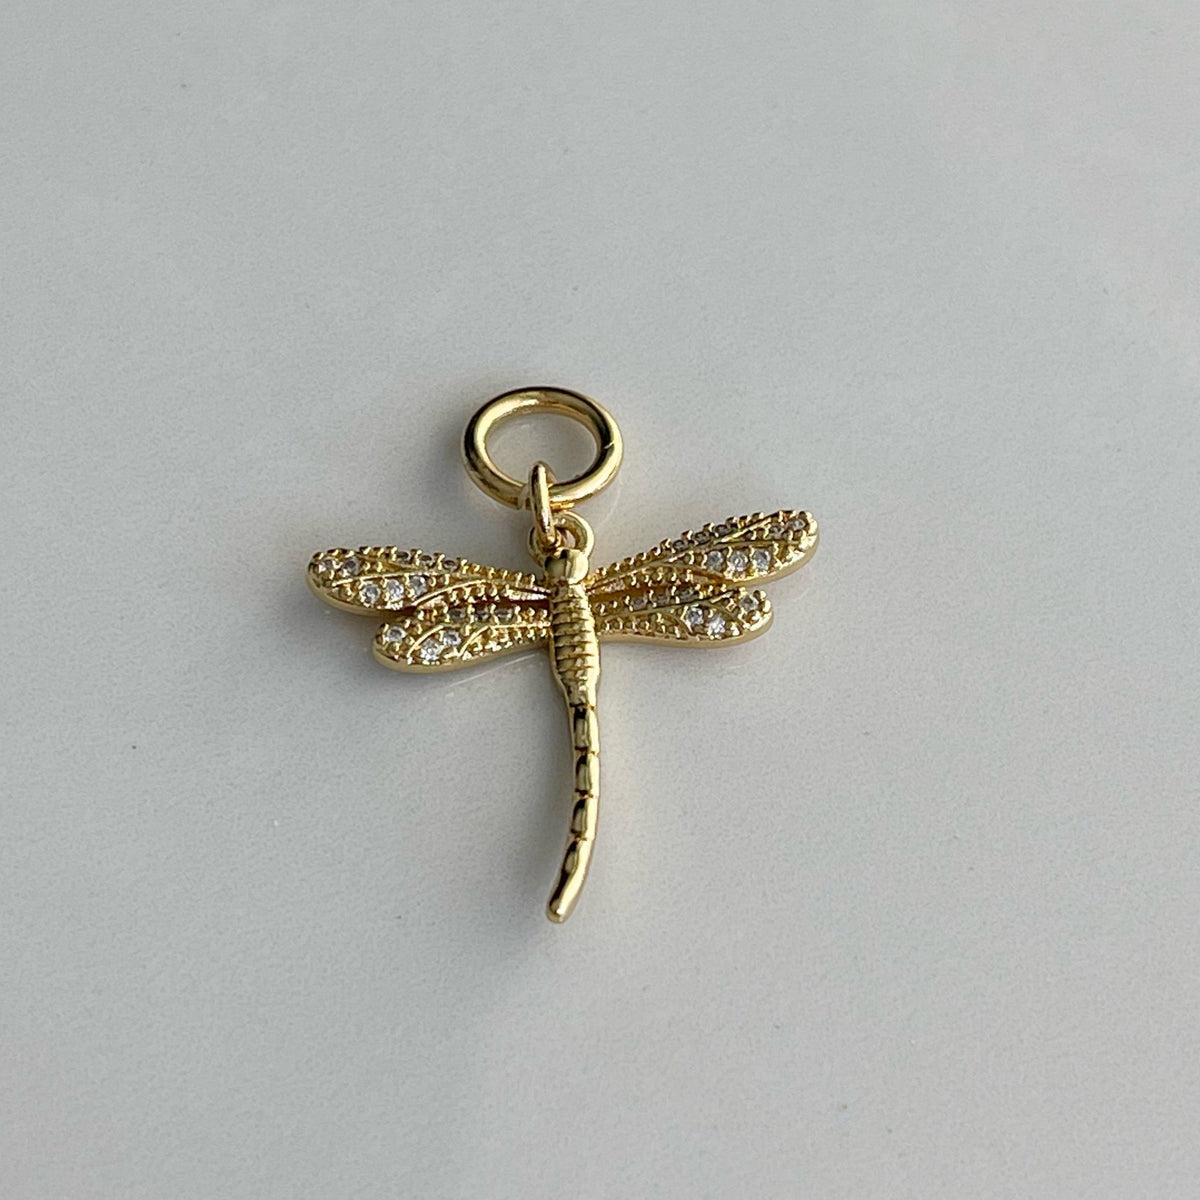 The Dragon Fly Charm